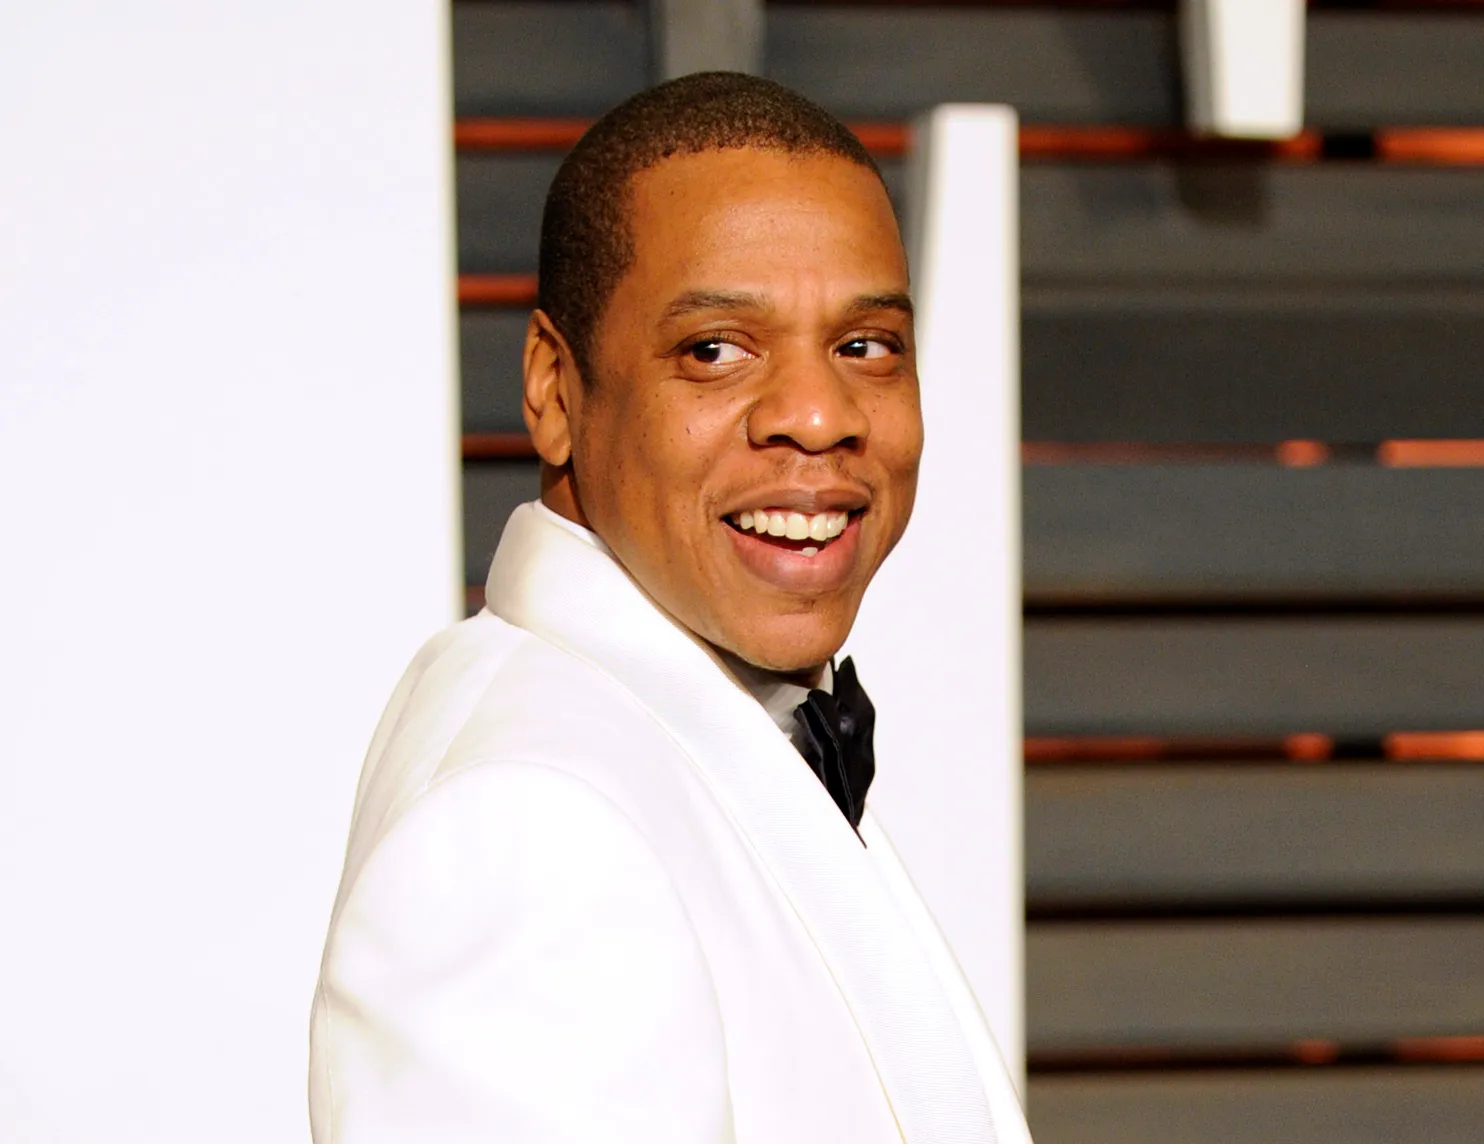 The Surprising Secret to Success for Jay-Z and Other Business Leaders